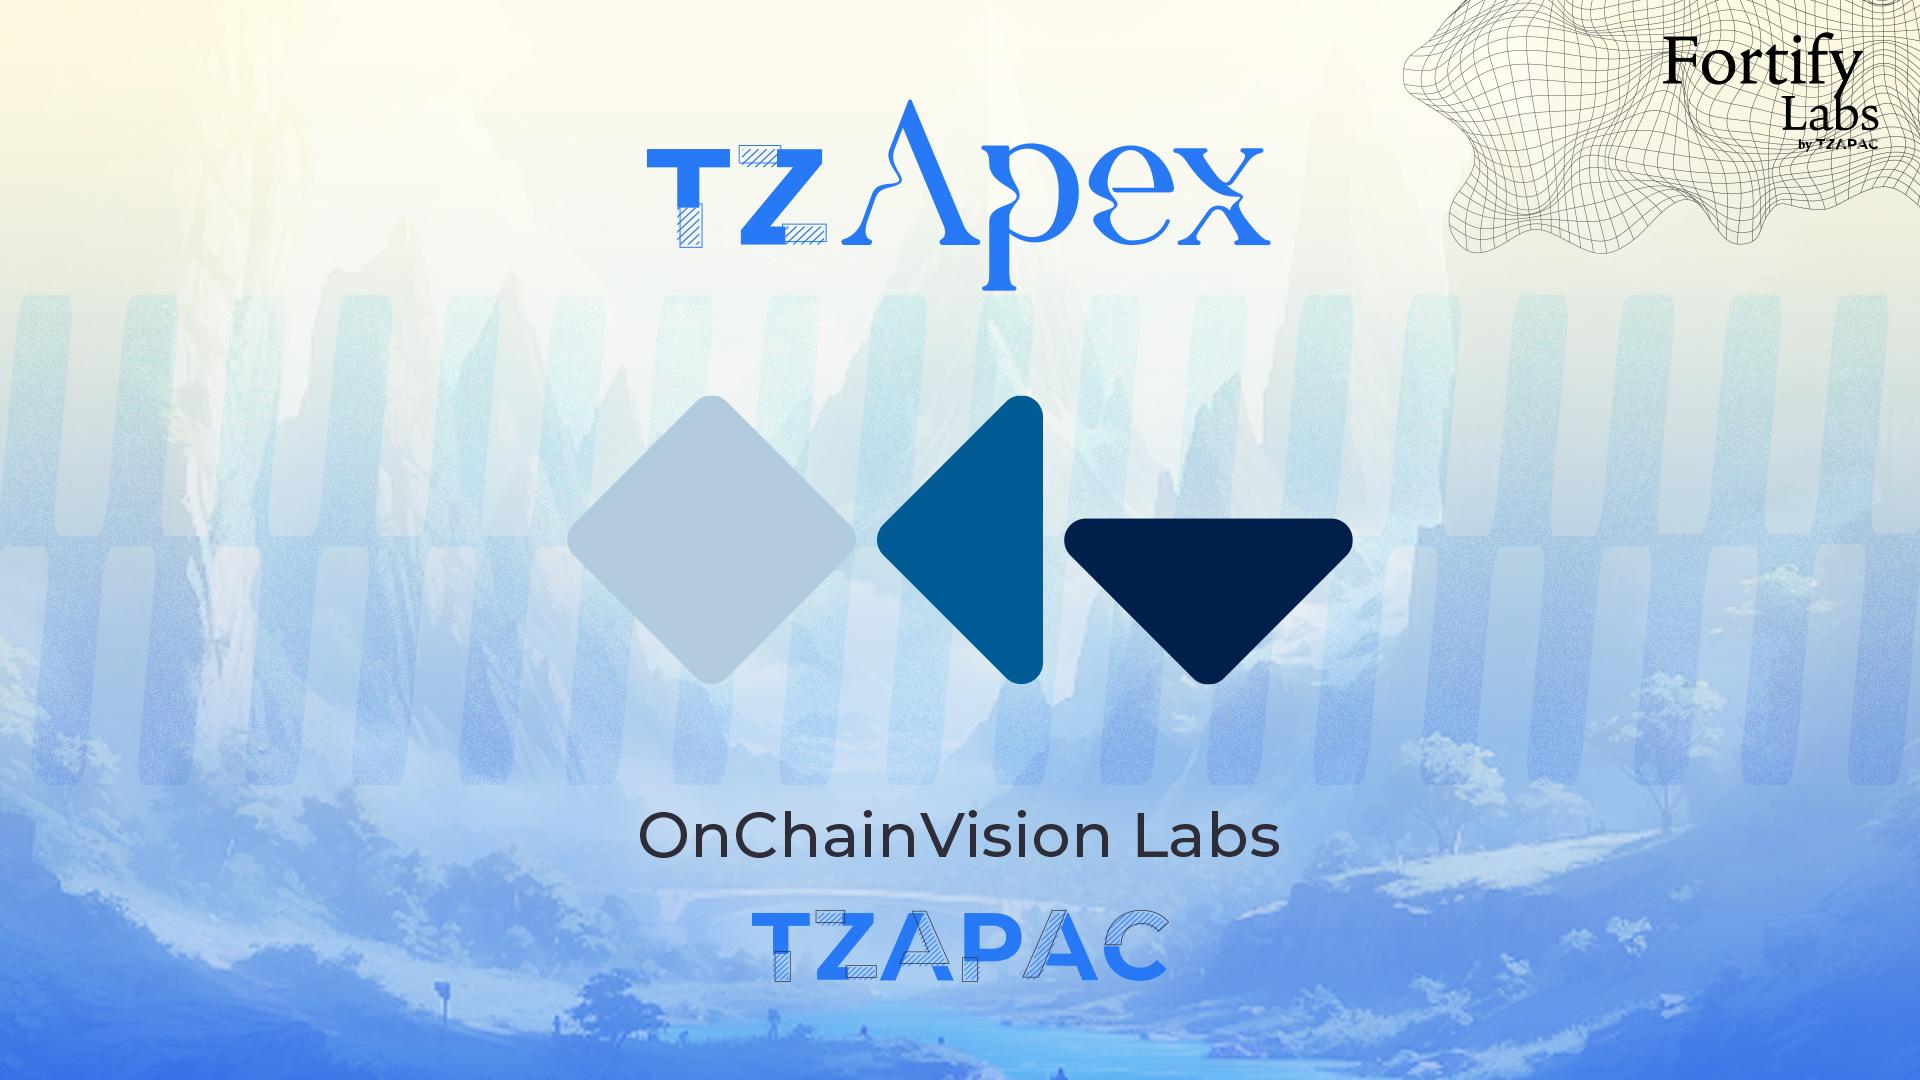 OnChainVision Labs